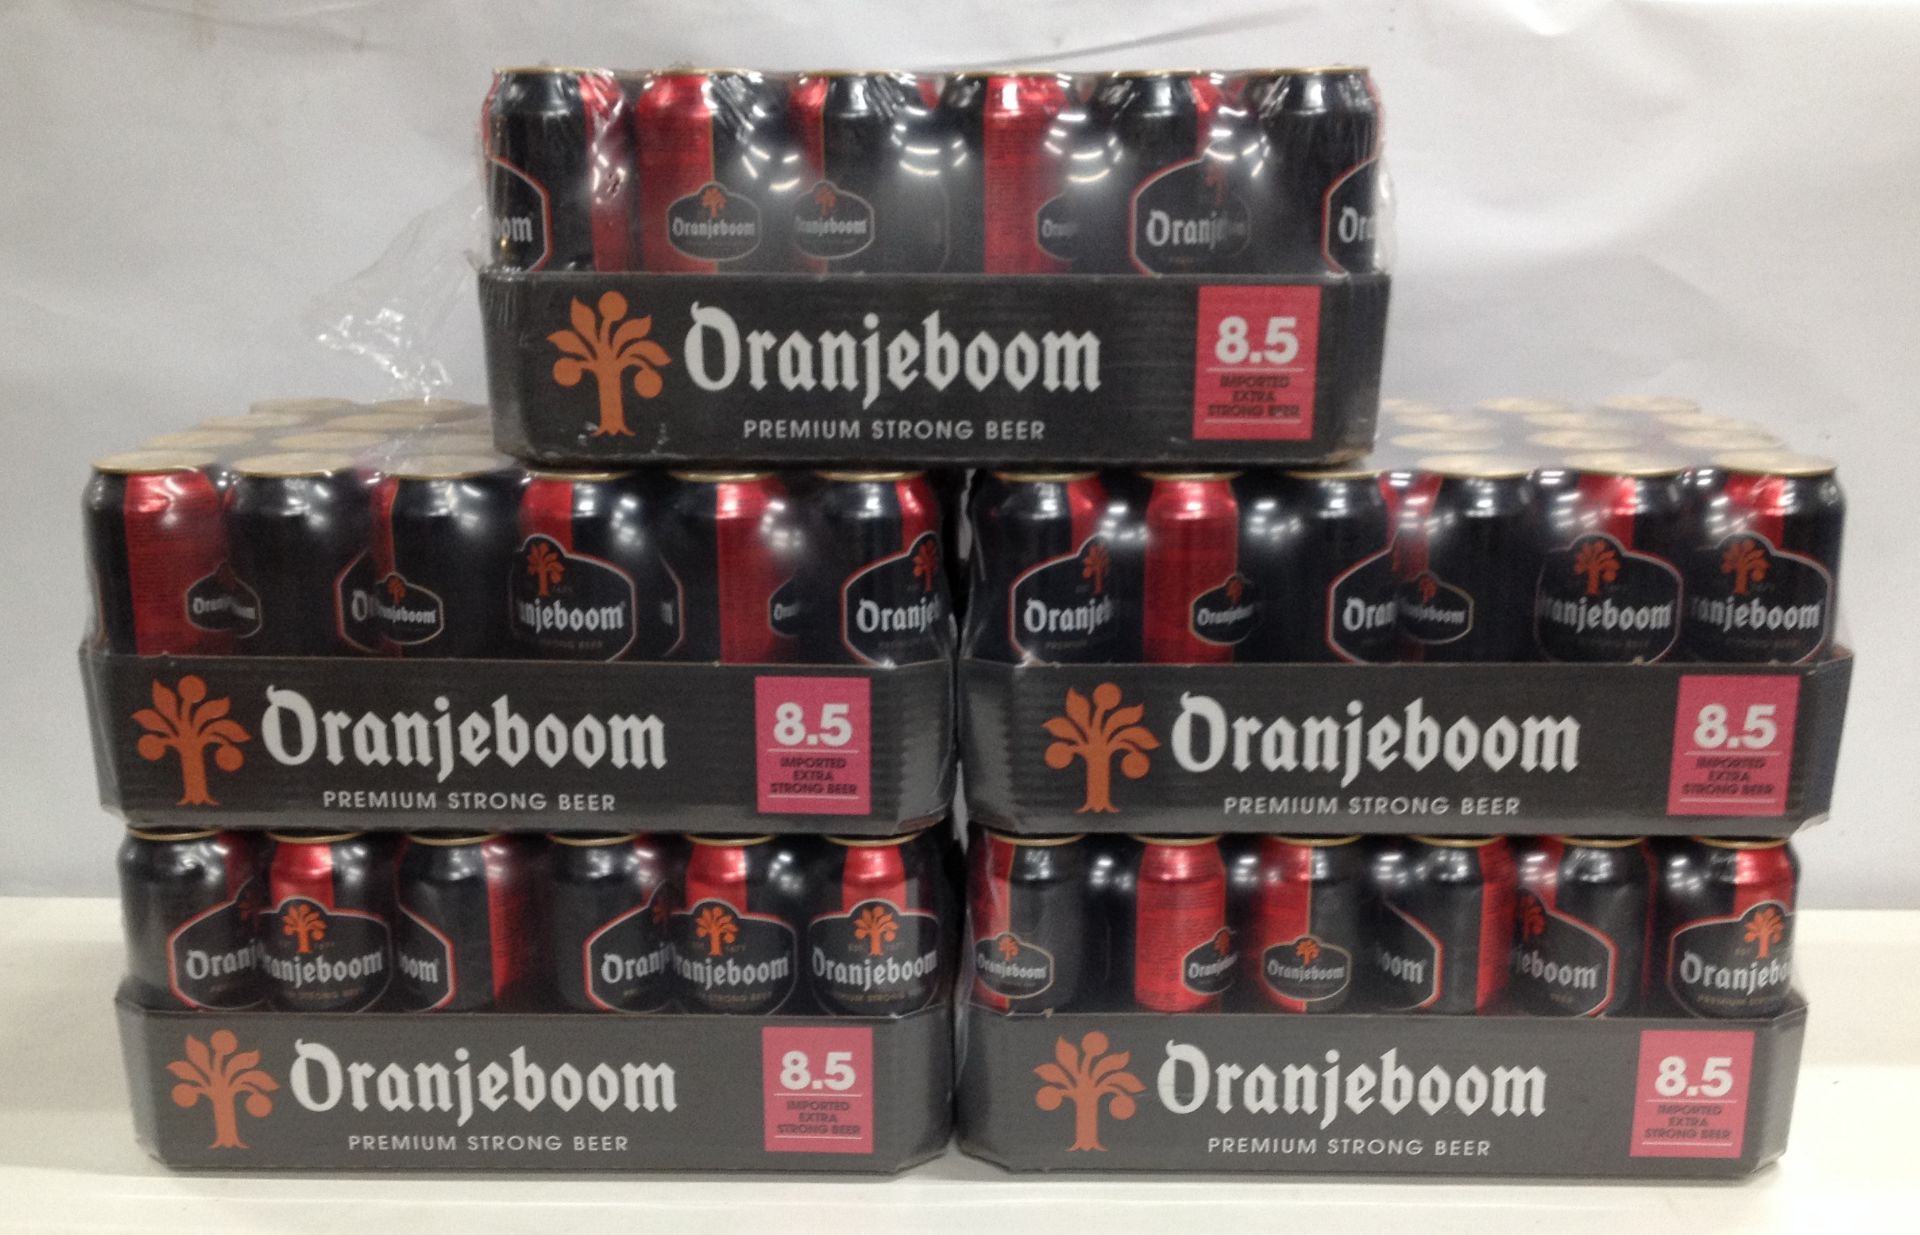 120 x Oranjeboom 8.5% Premium Strong Beer Cans - Image 2 of 3